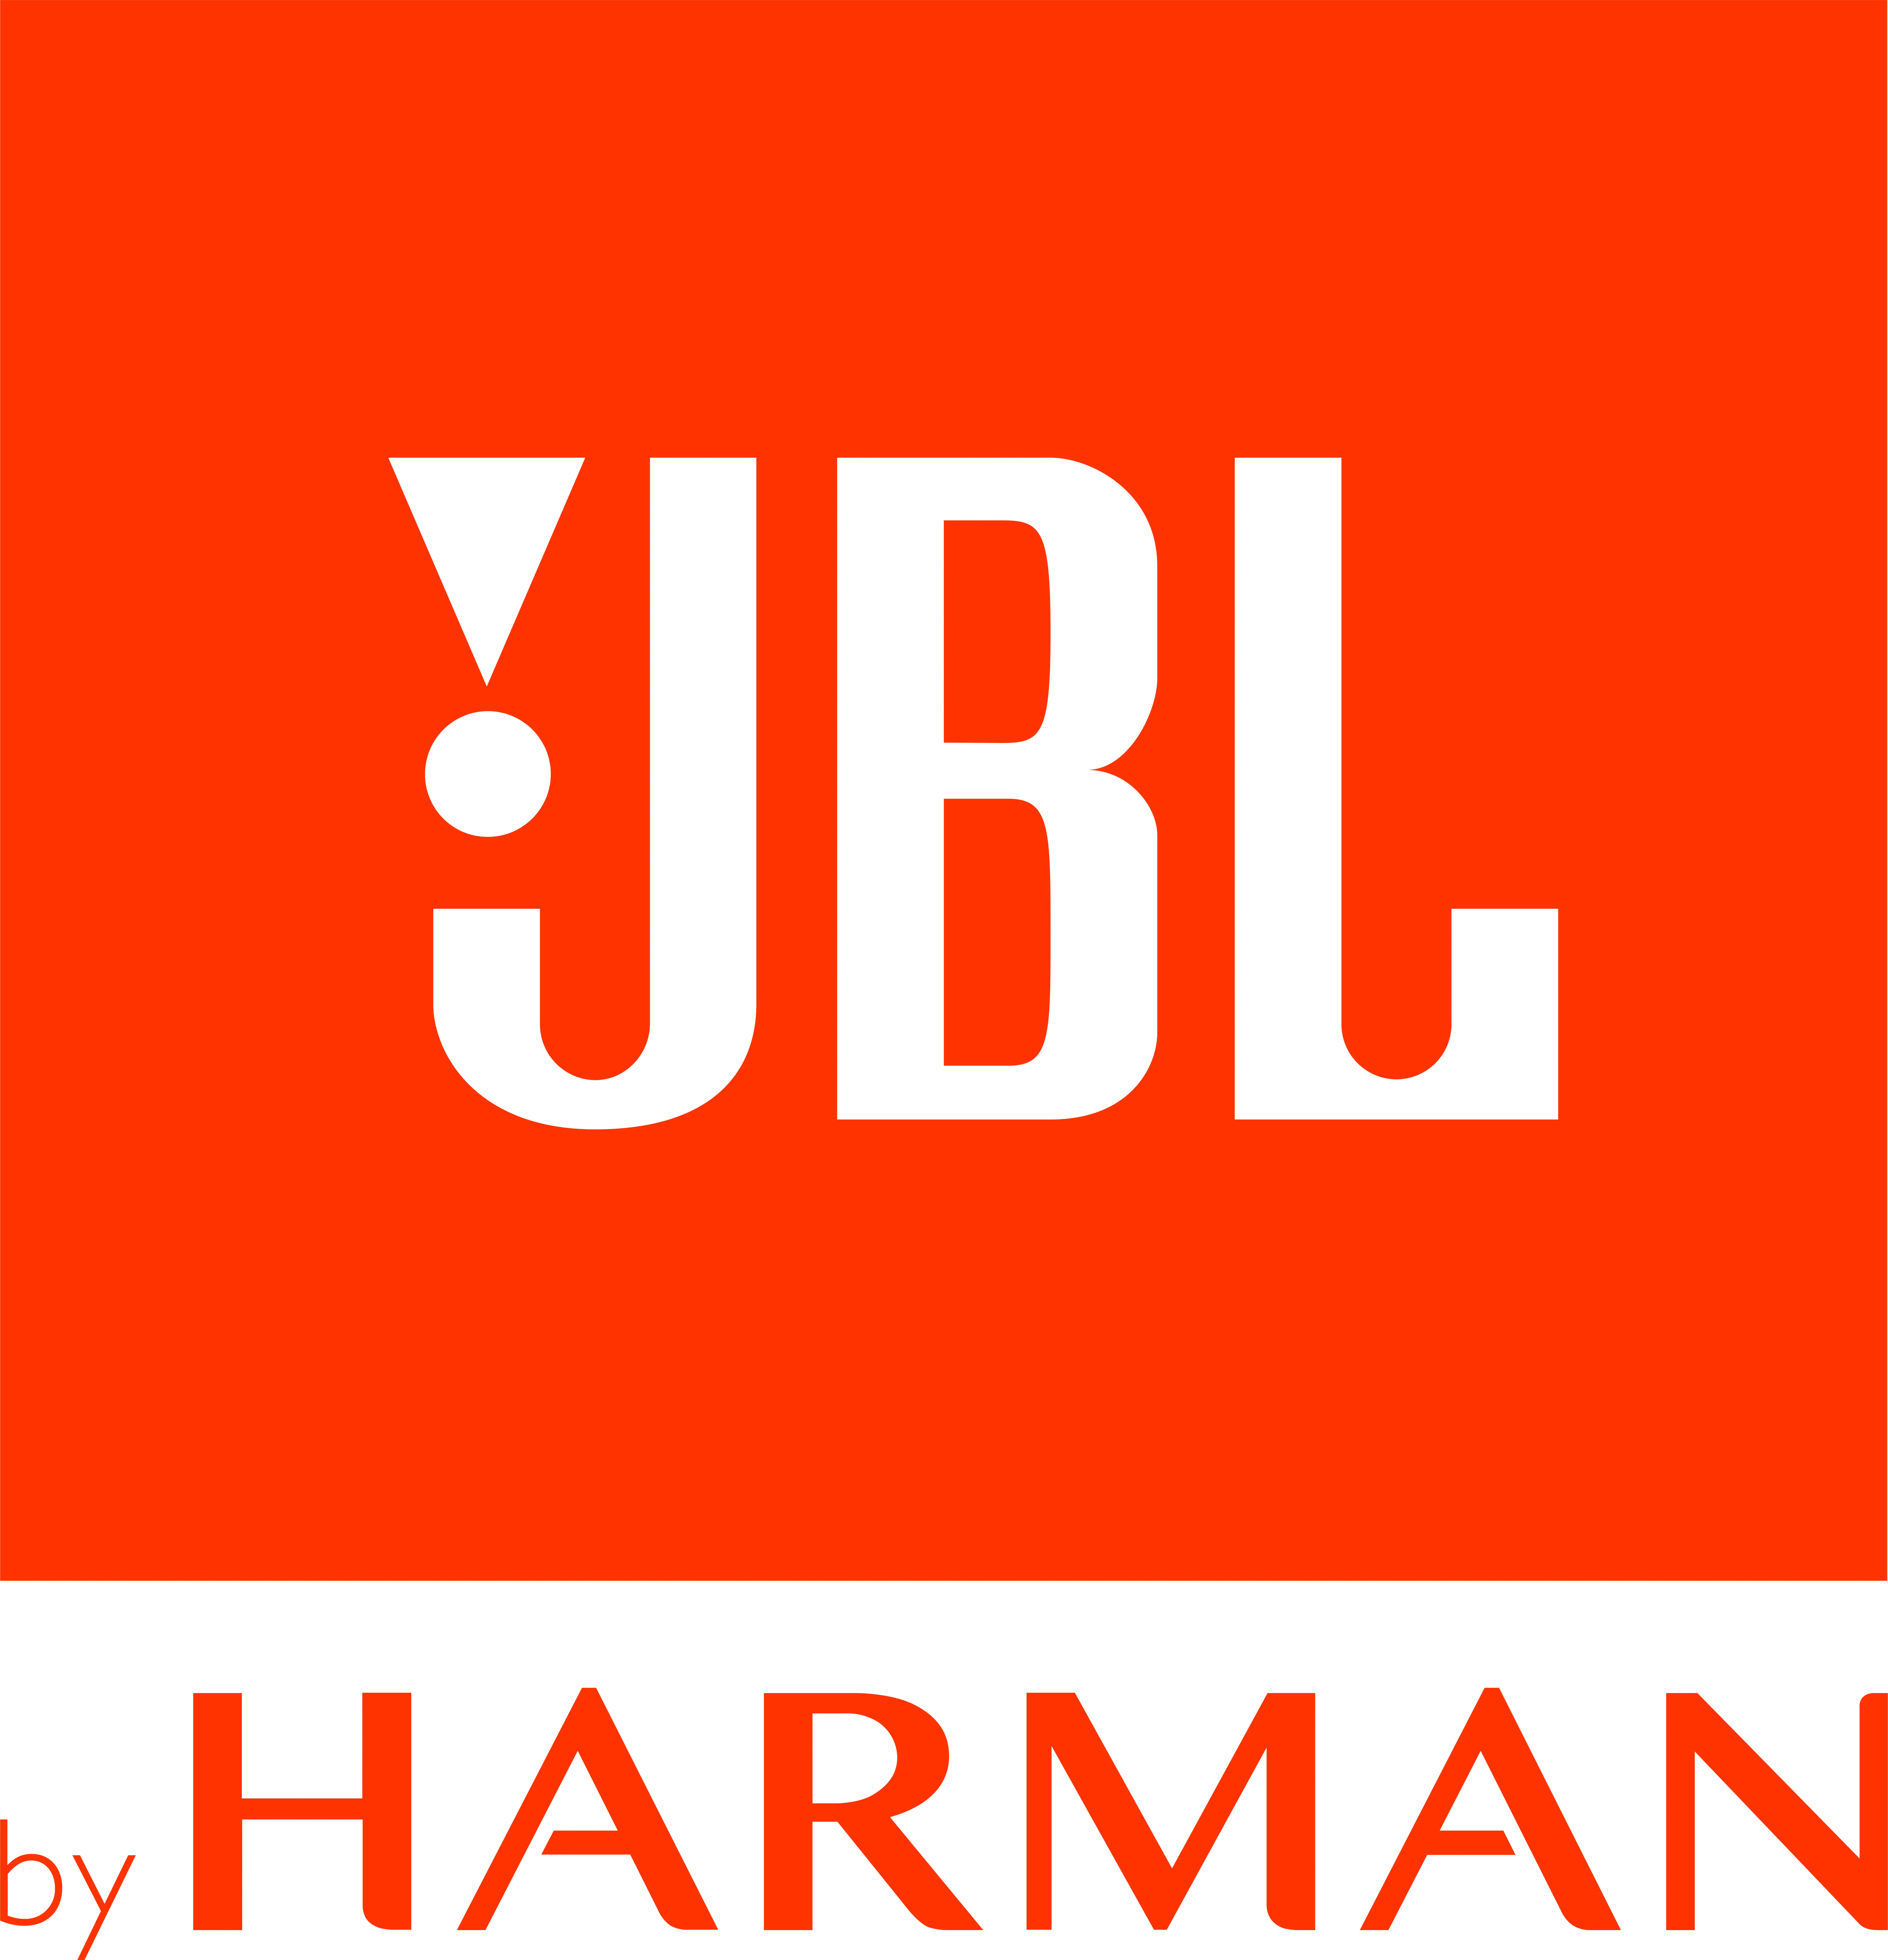 JBL Christmas Sale: Get Up To 80% OFF on Selected Items